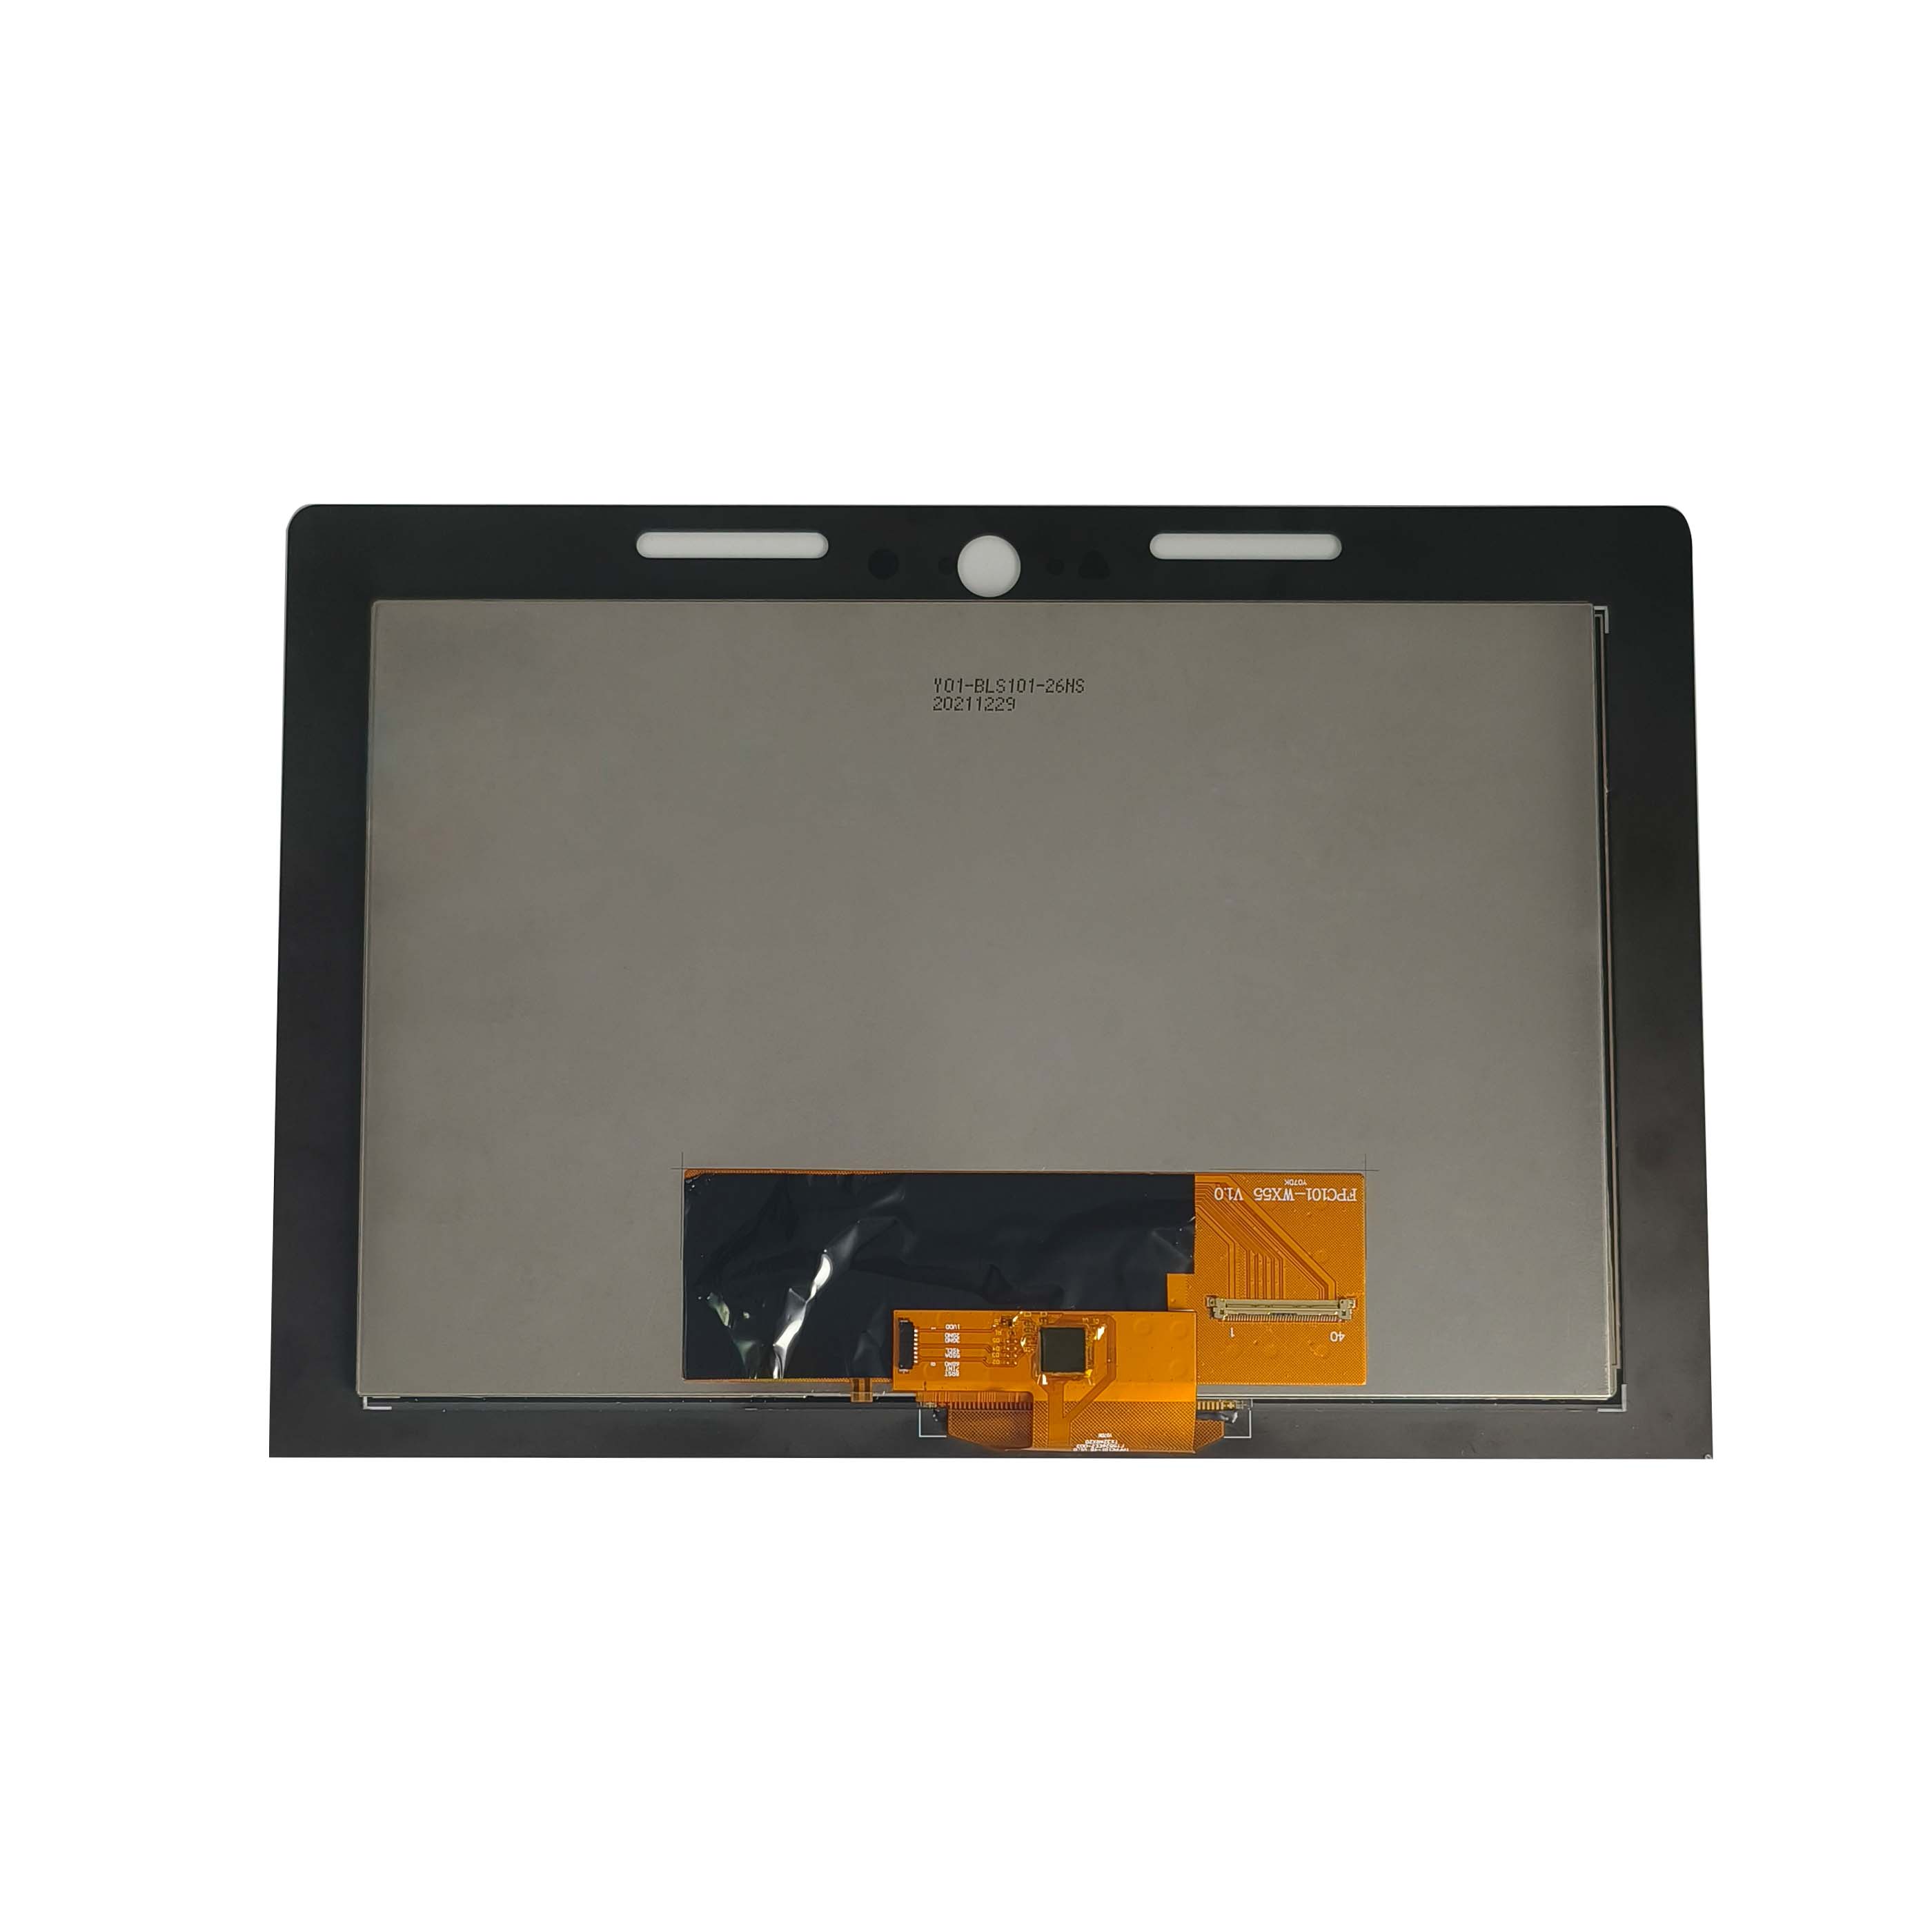 10.1inch Capacitive Touch  LCD display IPS With LVDS Interface